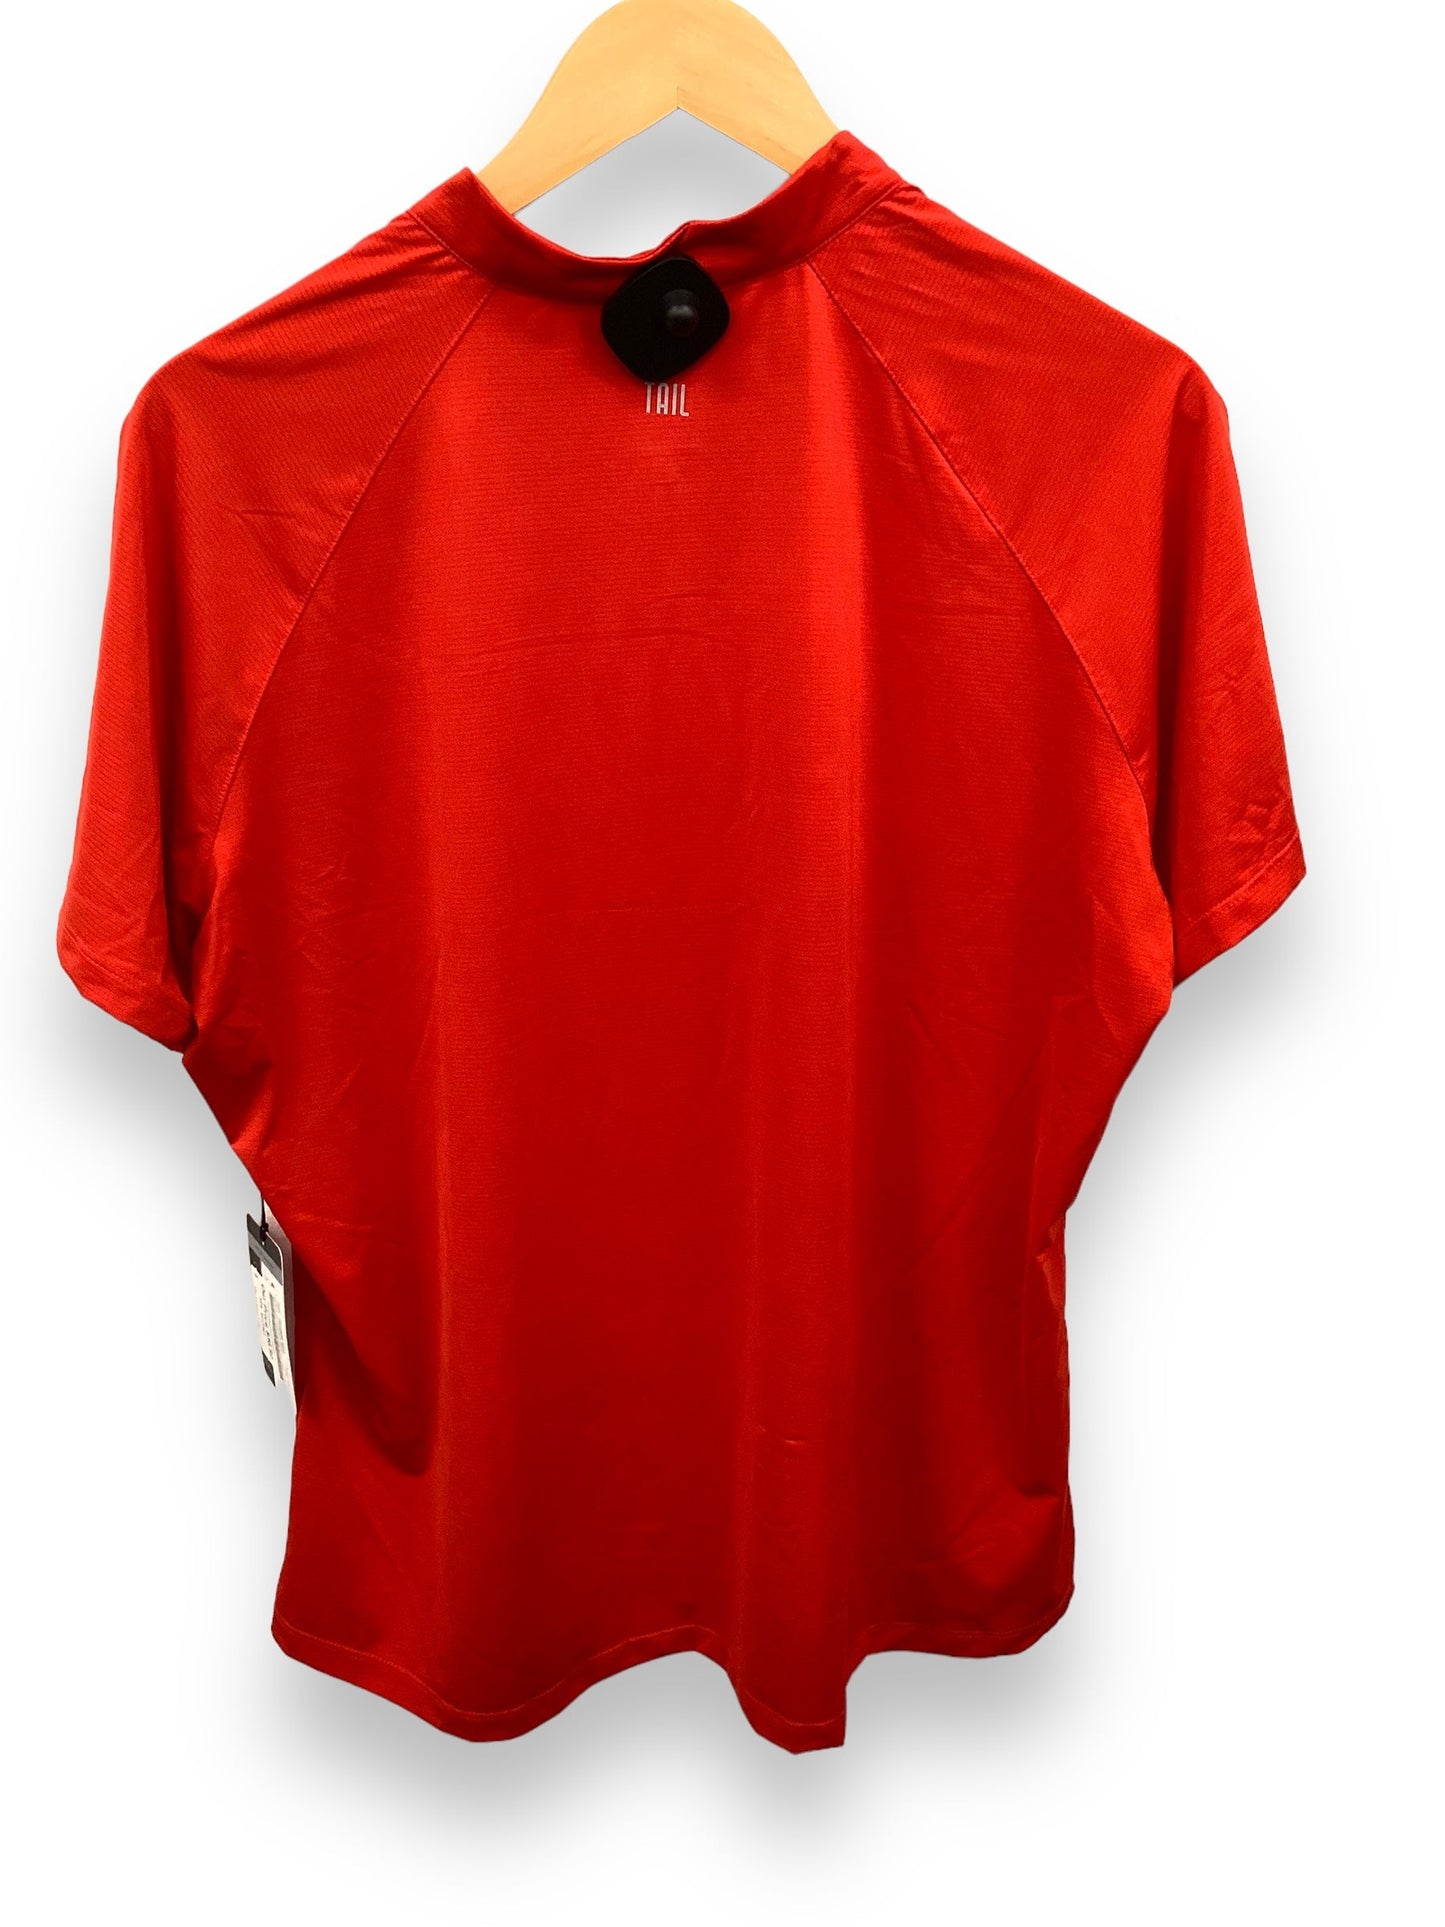 Red Top Short Sleeve Tail, Size Xxl